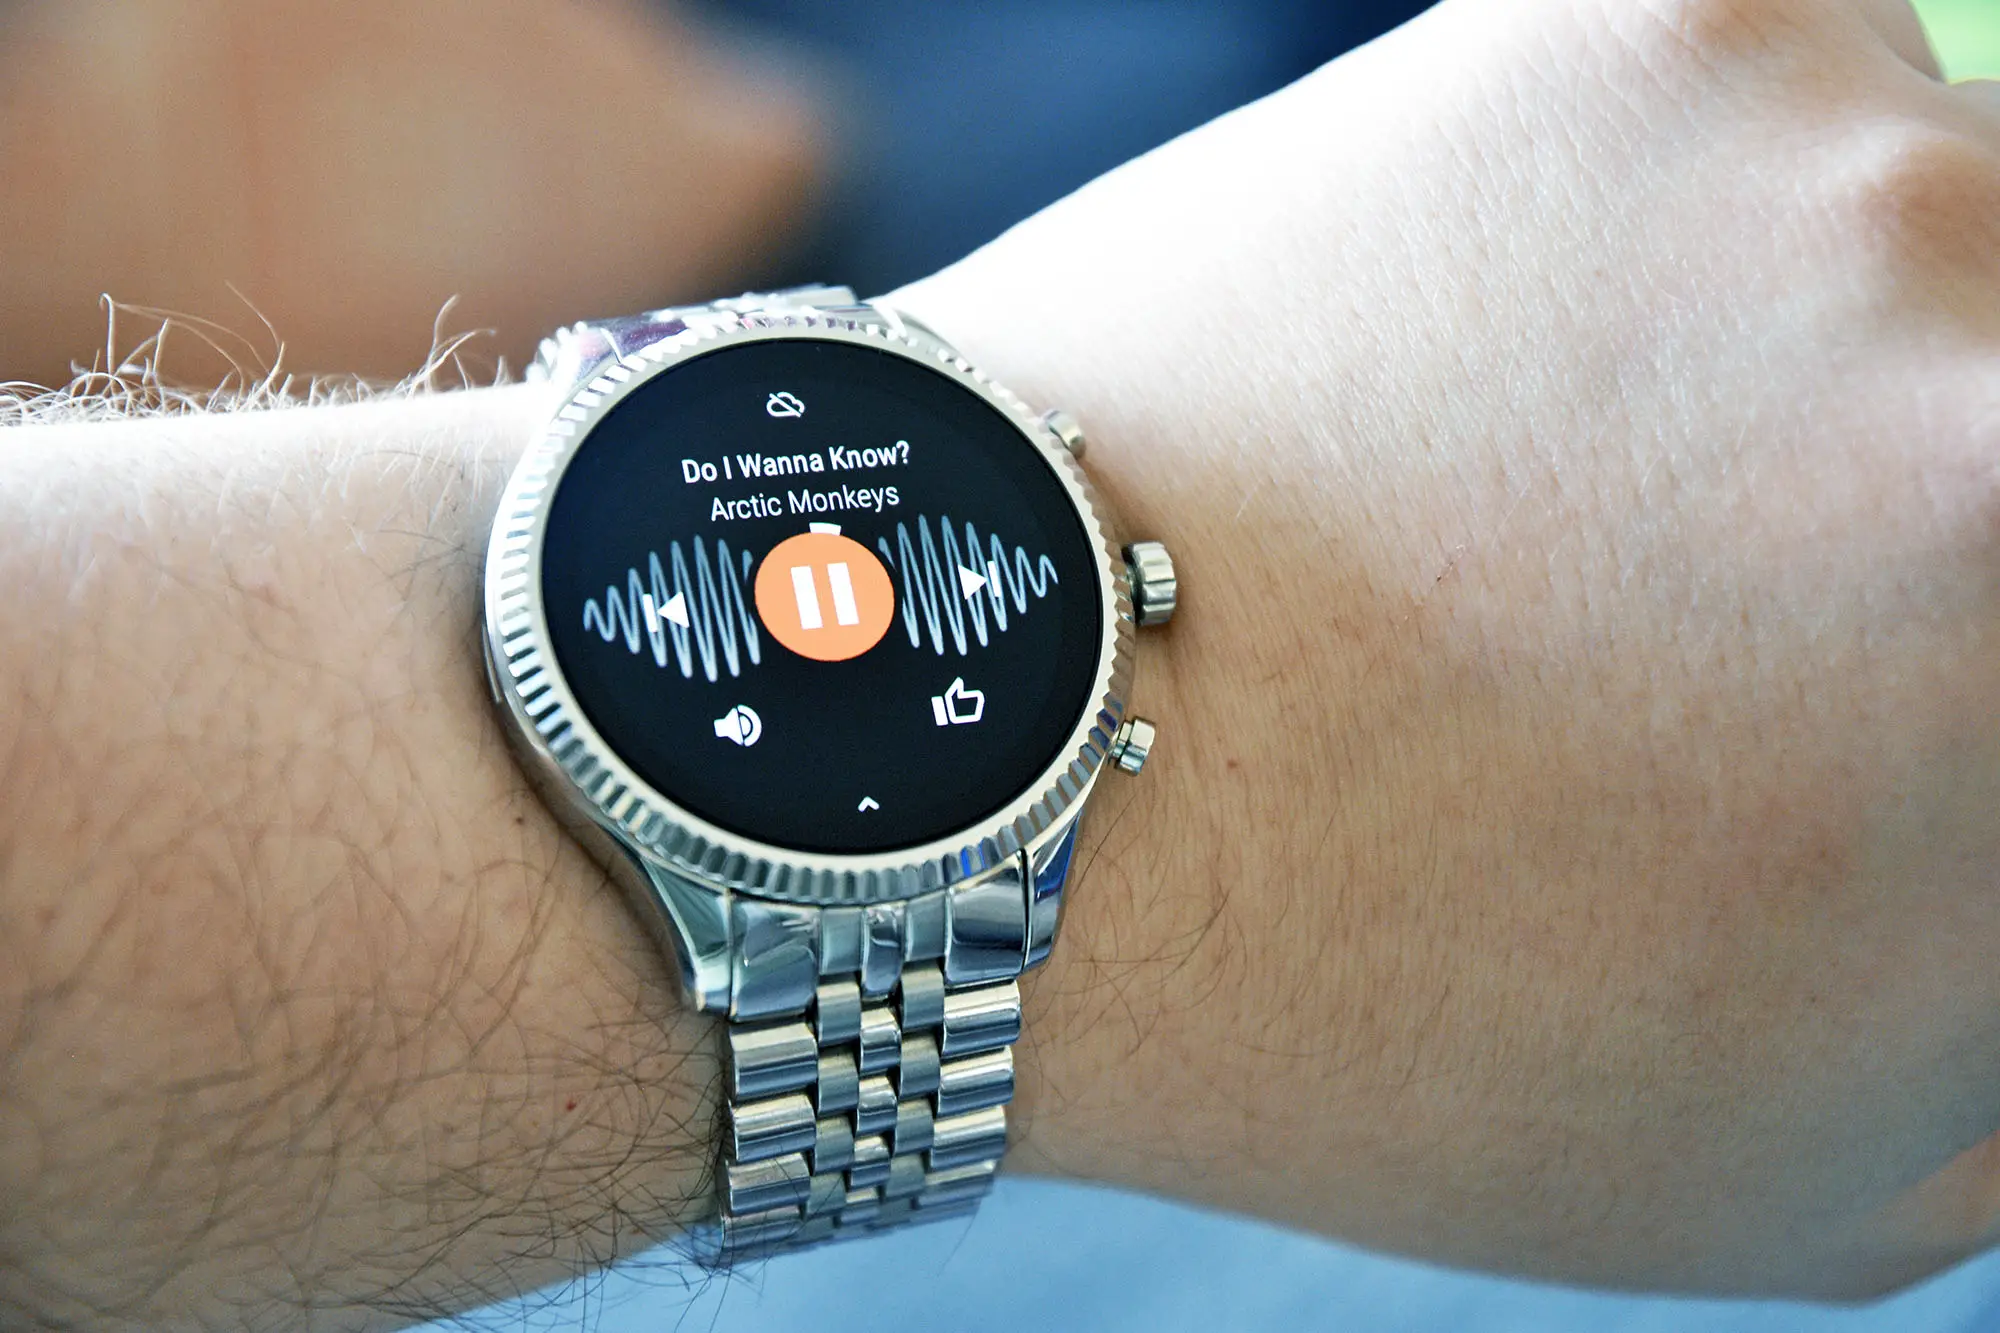 Michael Kors 2 smartwatch review: Wear OS a shell – Phandroid